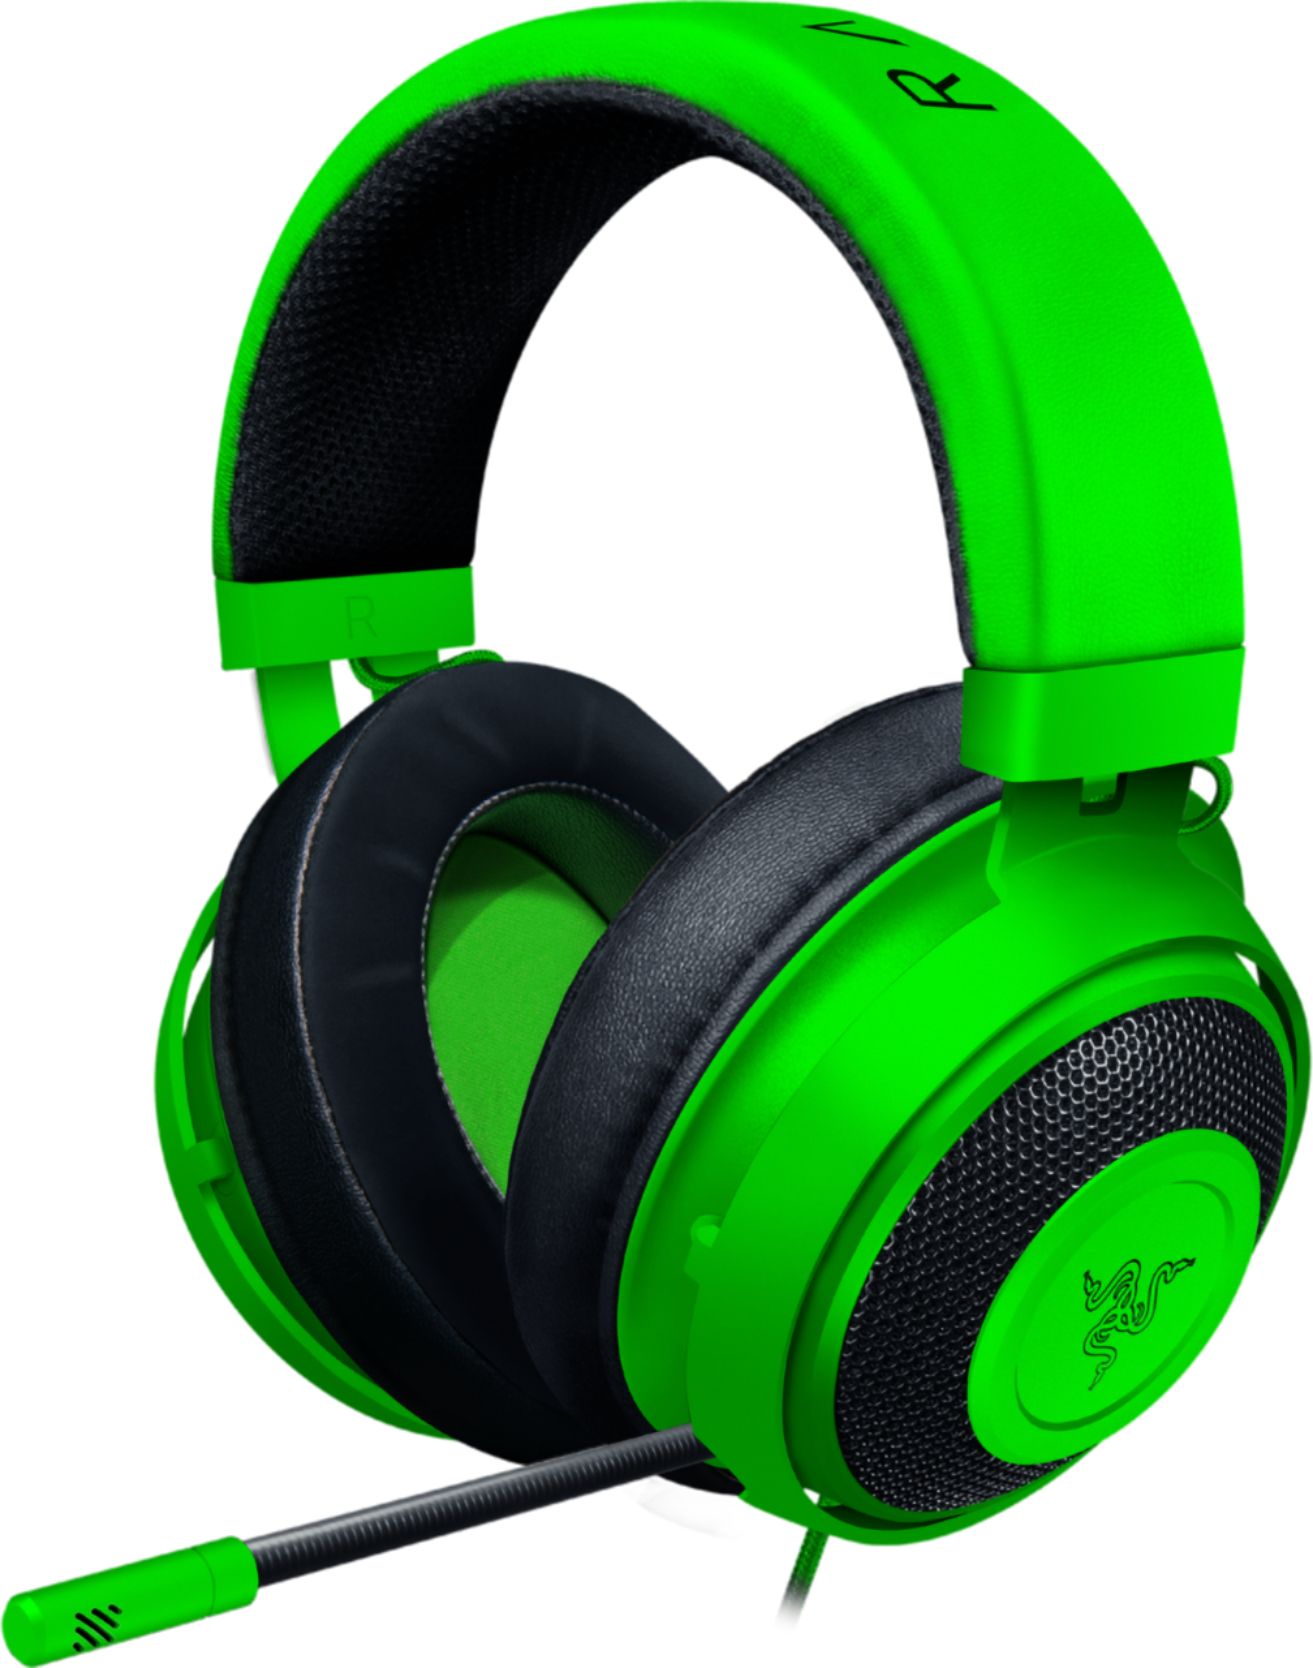 Razer - Kraken Wired 7.1 Surround Sound Gaming Headset for PC, PS4, PS5, Switch, Xbox One, Series X|S - Green